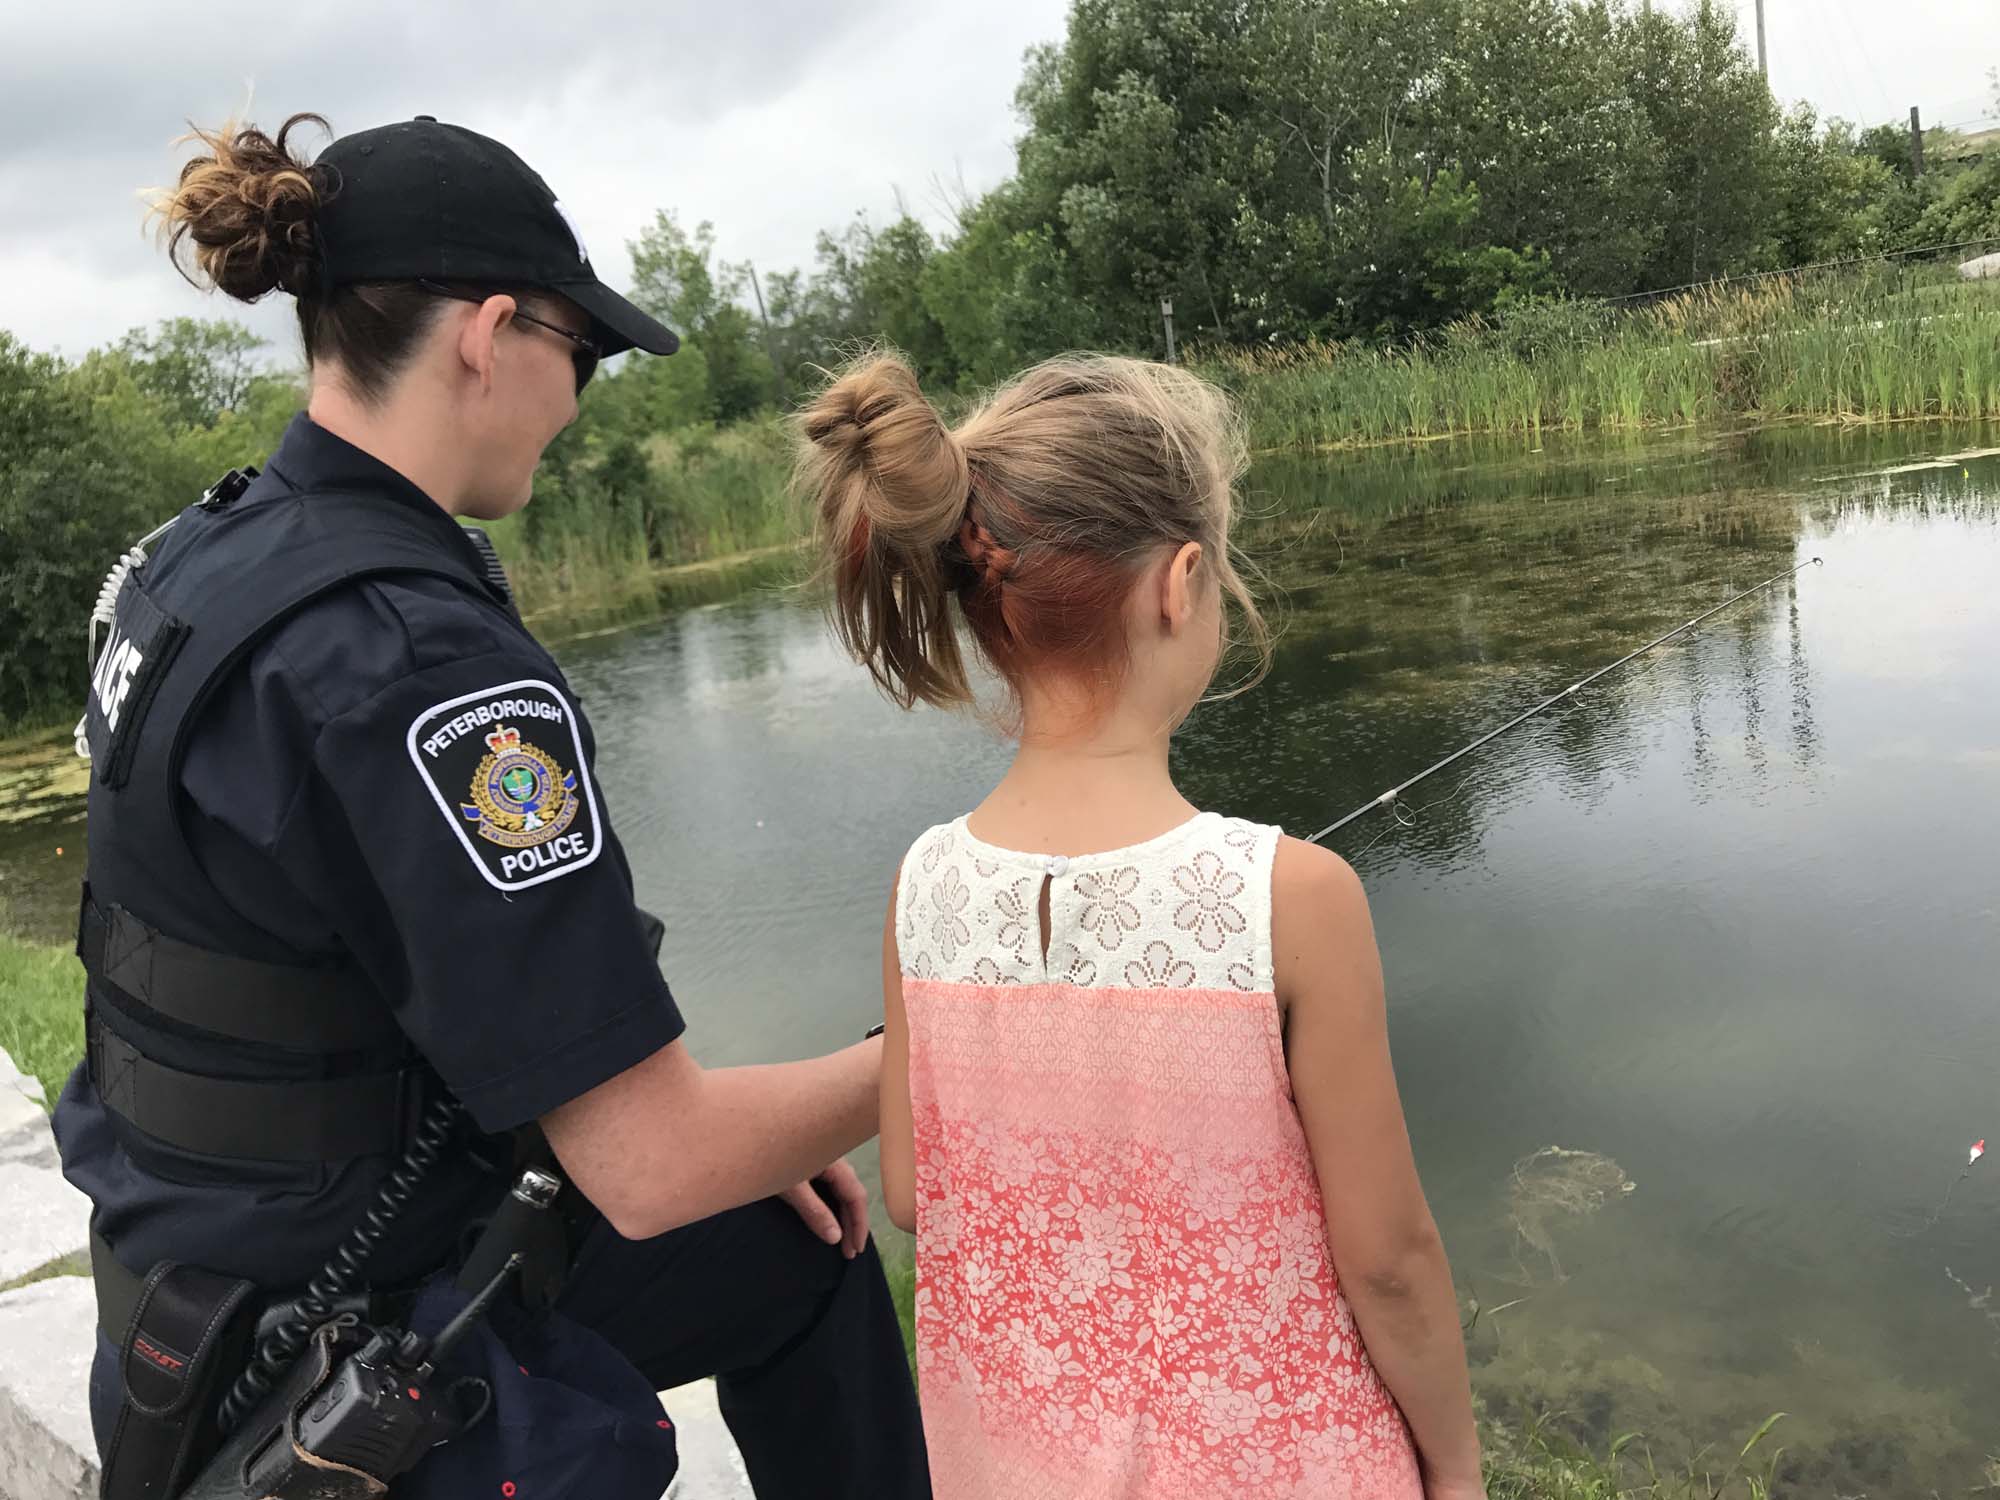 A Peterborough police officer stands with a little girl fishing in a pond